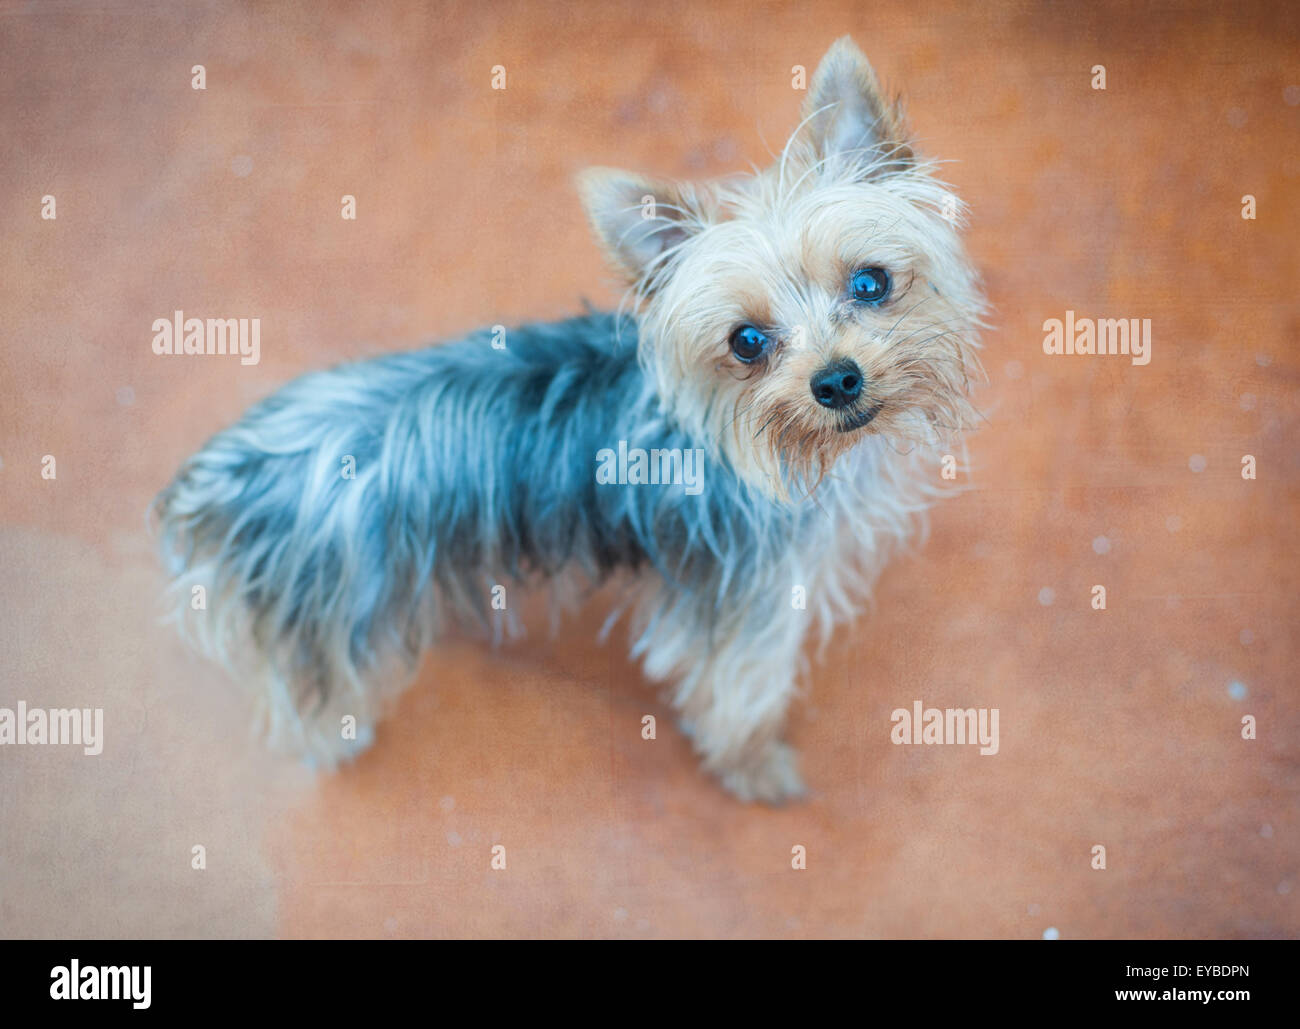 Cute little dog looking at the camera Stock Photo